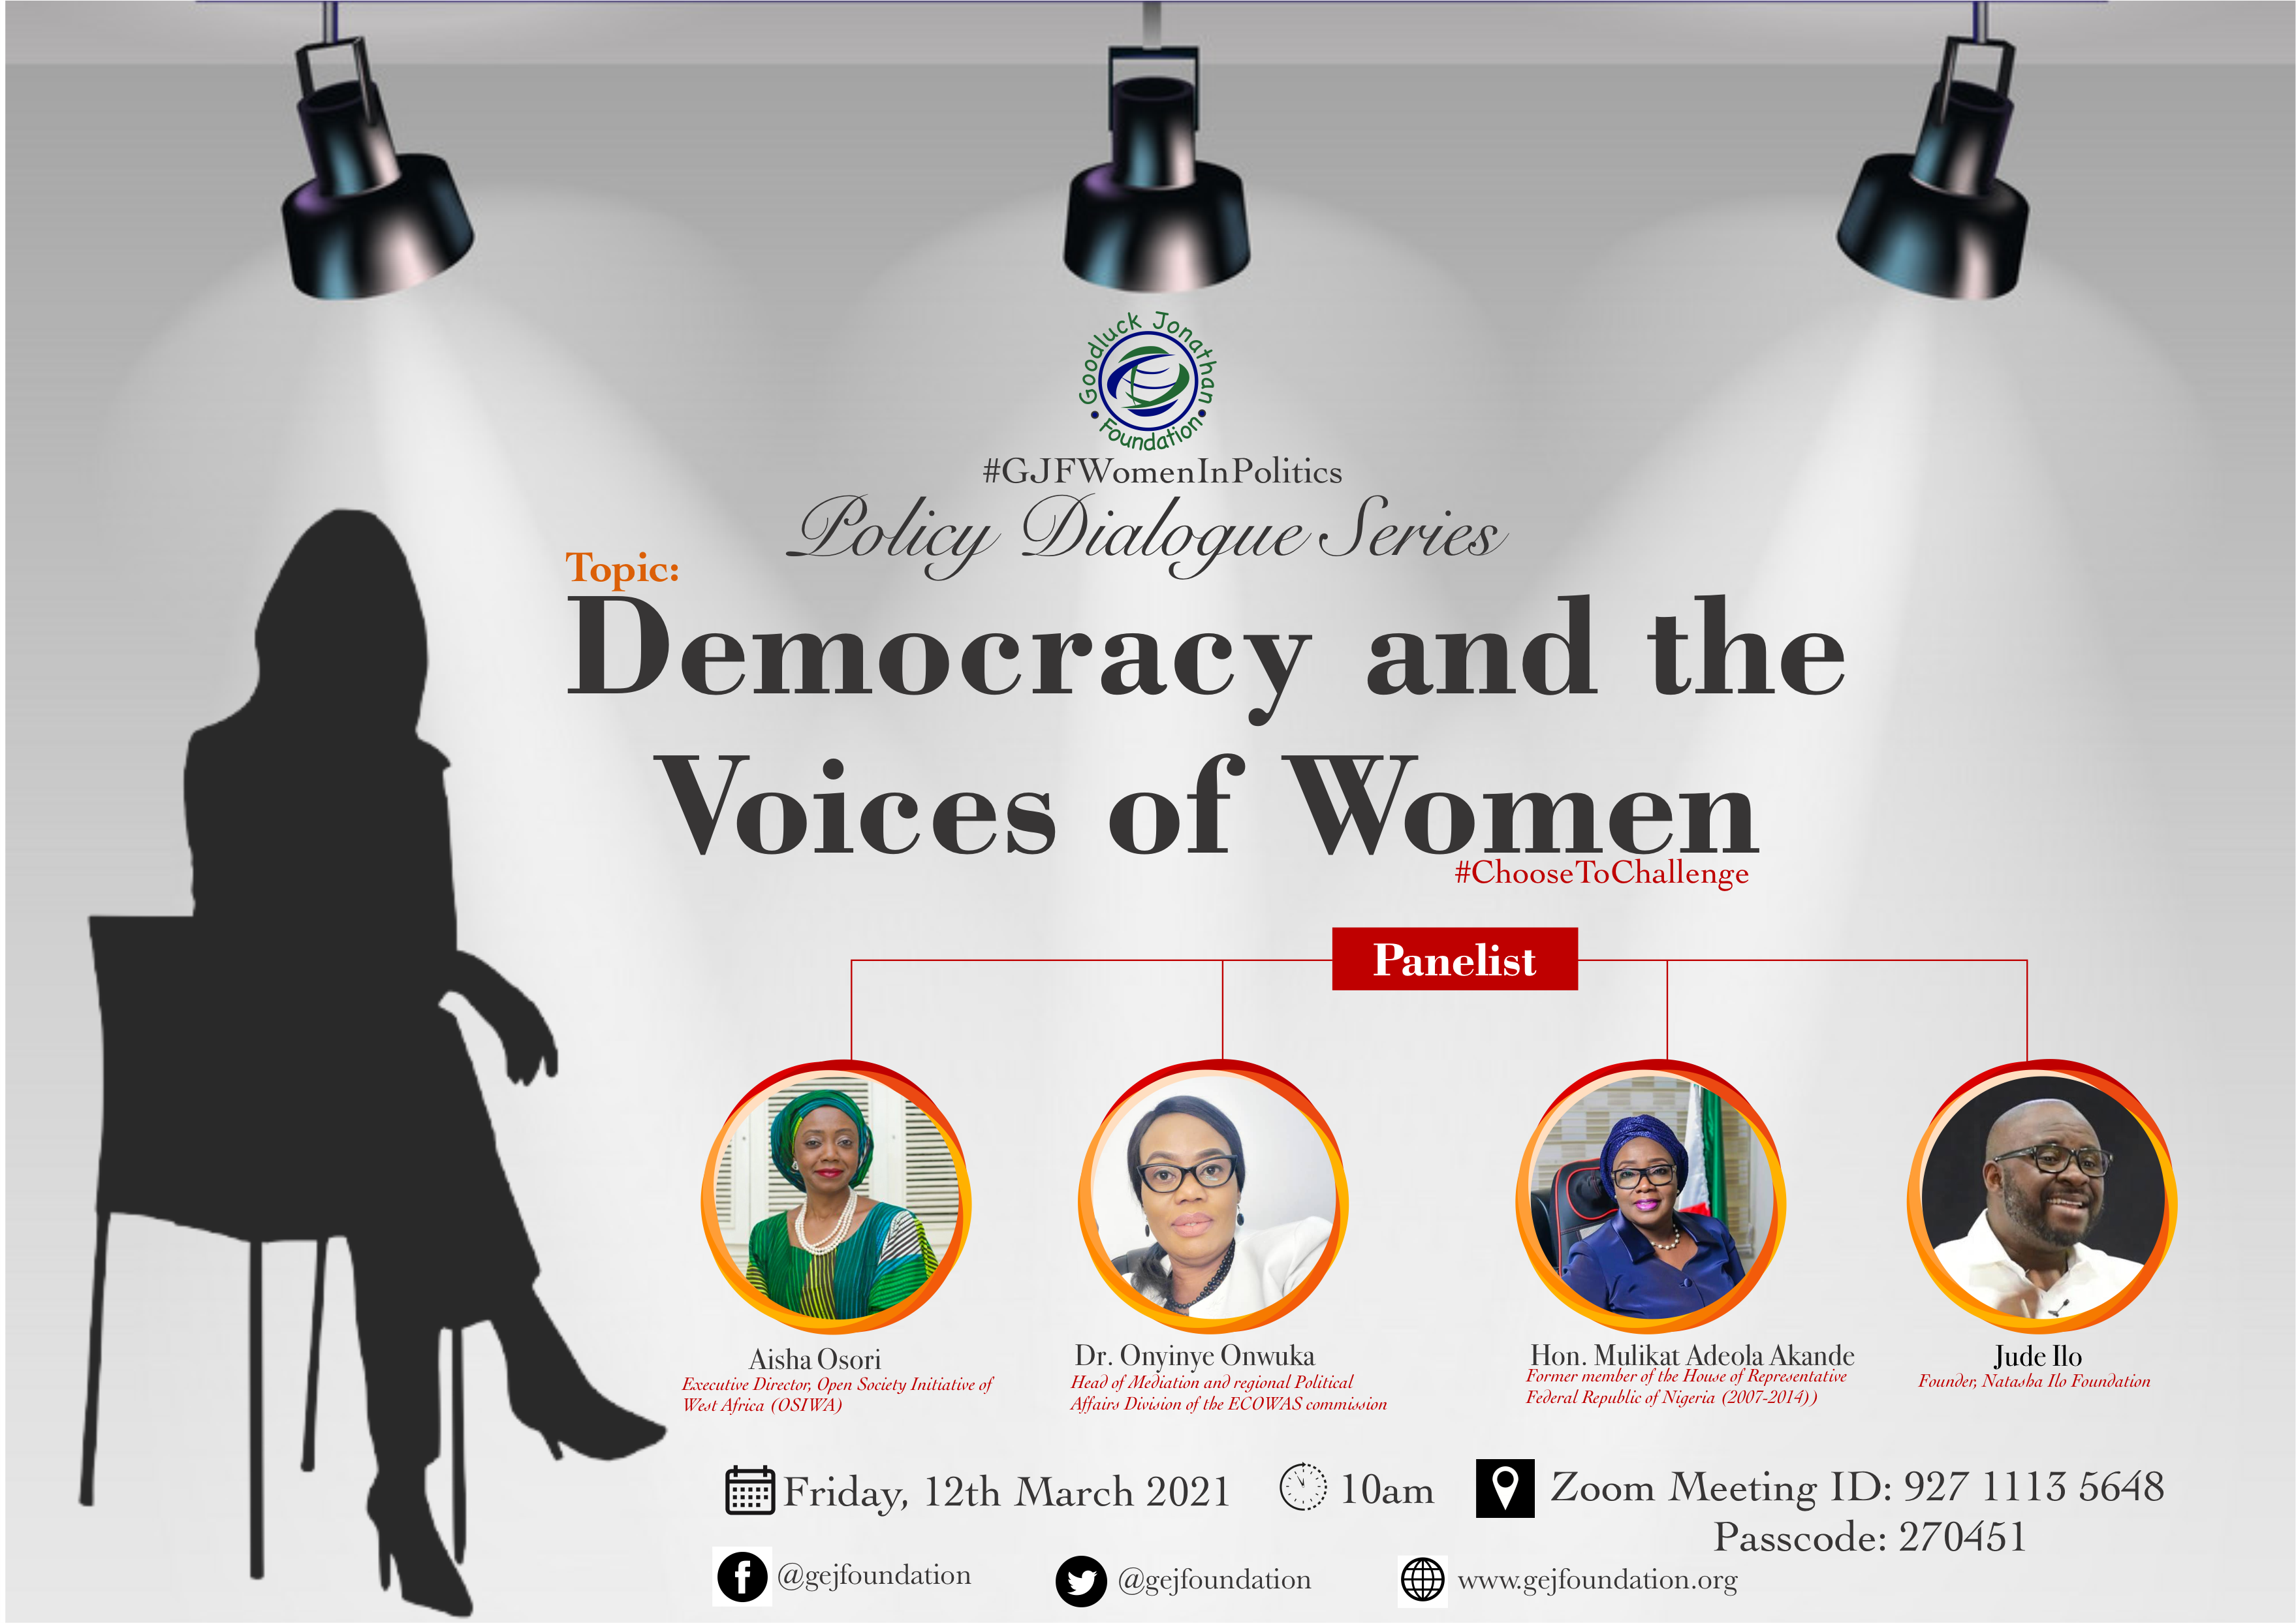 Video from the GJF Women in Politics Dialogues series themed: Democracy and the Voice of Women